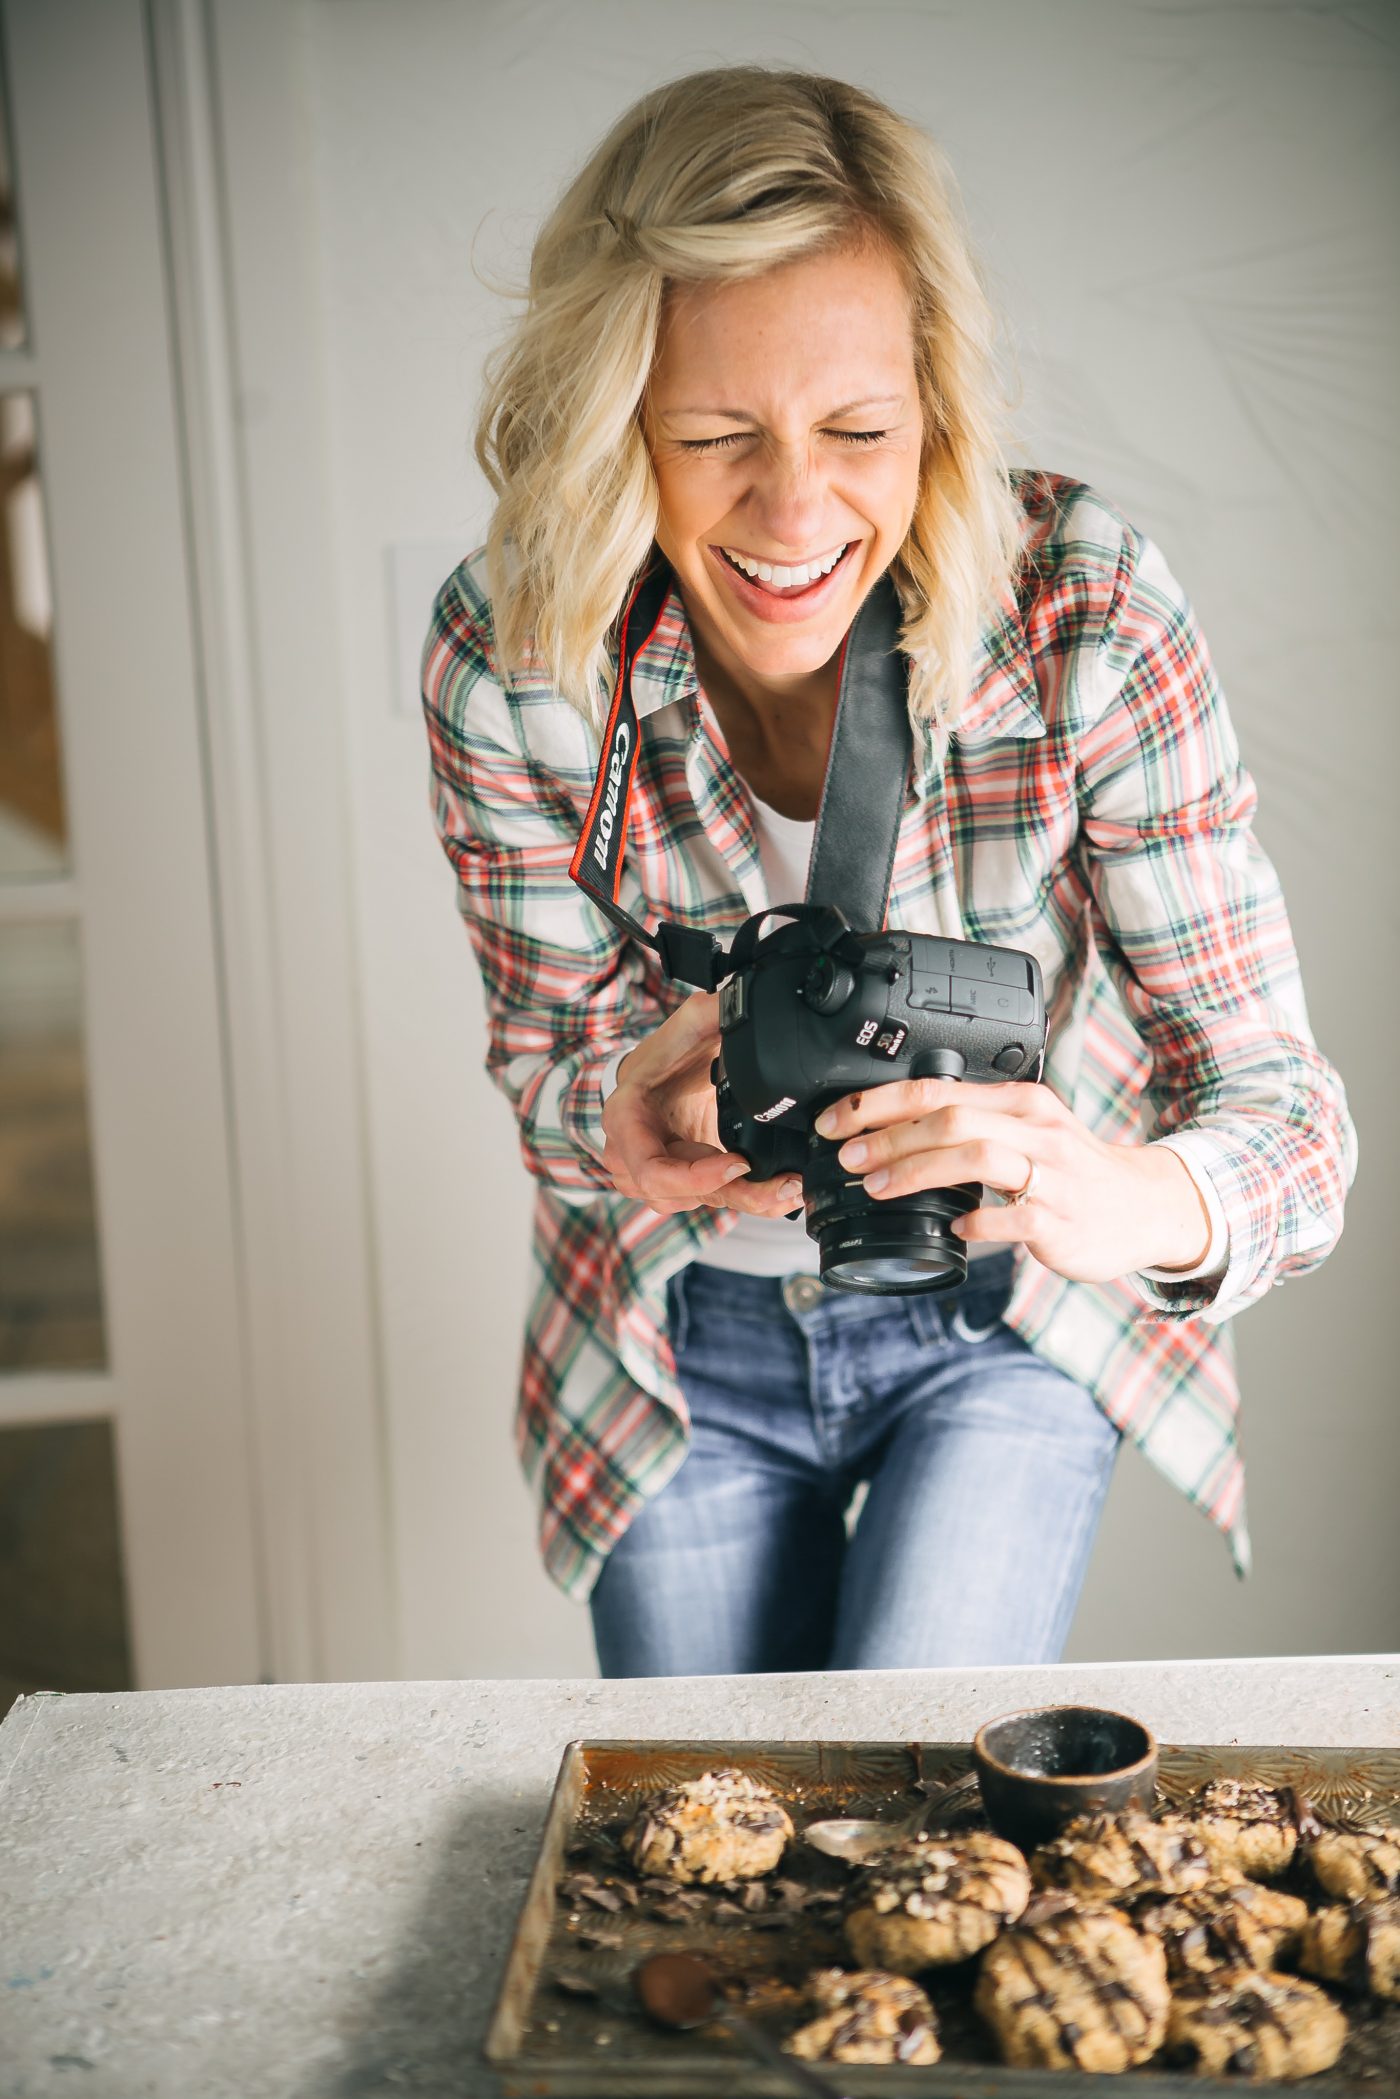 A woman laughing while holding a dslr camera above a baking sheet of food